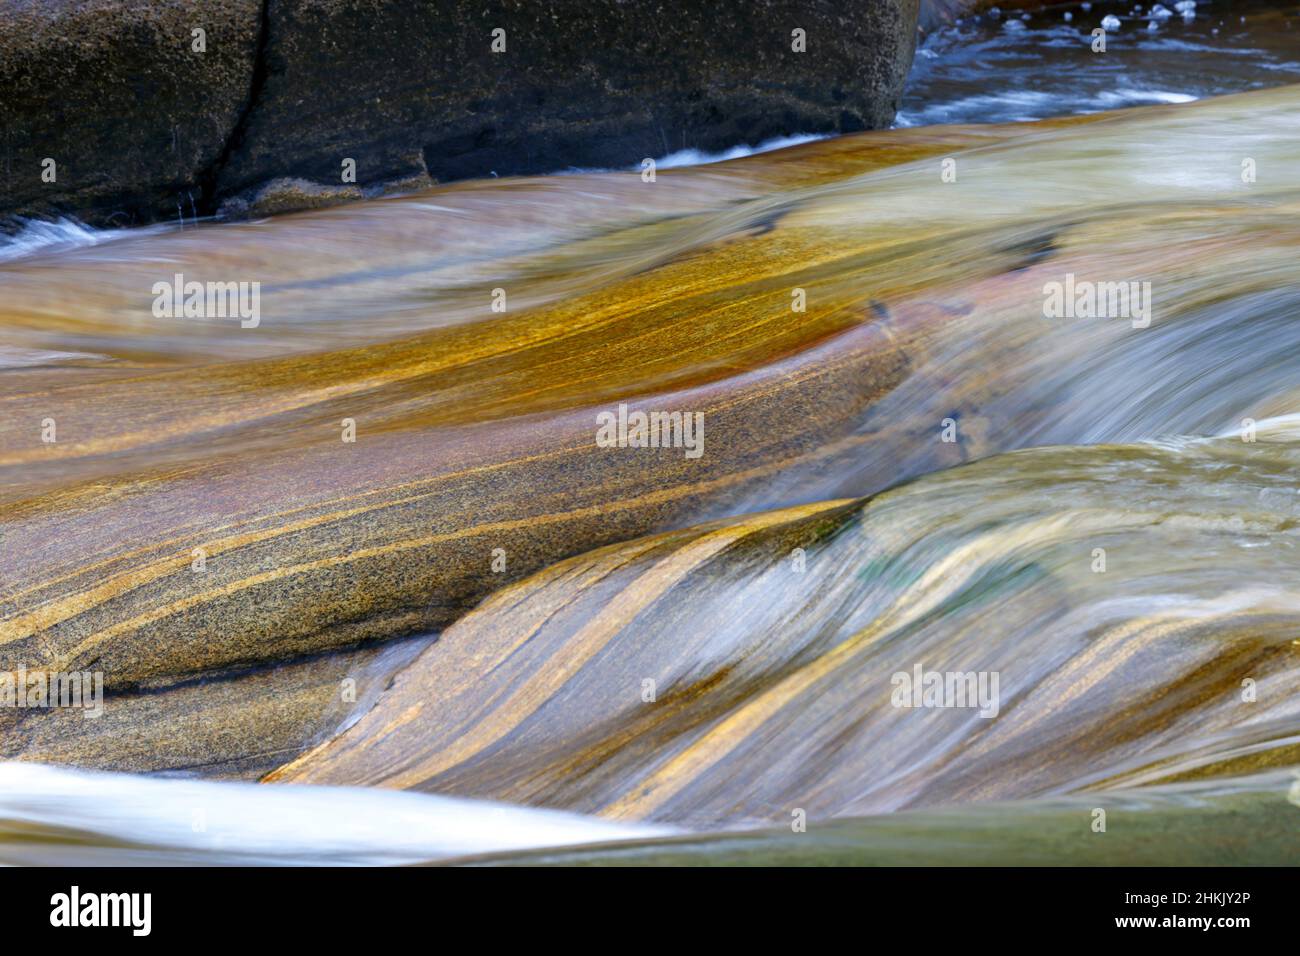 smoothly polished rocks in the Verzasca mountain river, shapes and colours on overflowing rocks, Switzerland, Ticino, Lavertezzo Stock Photo